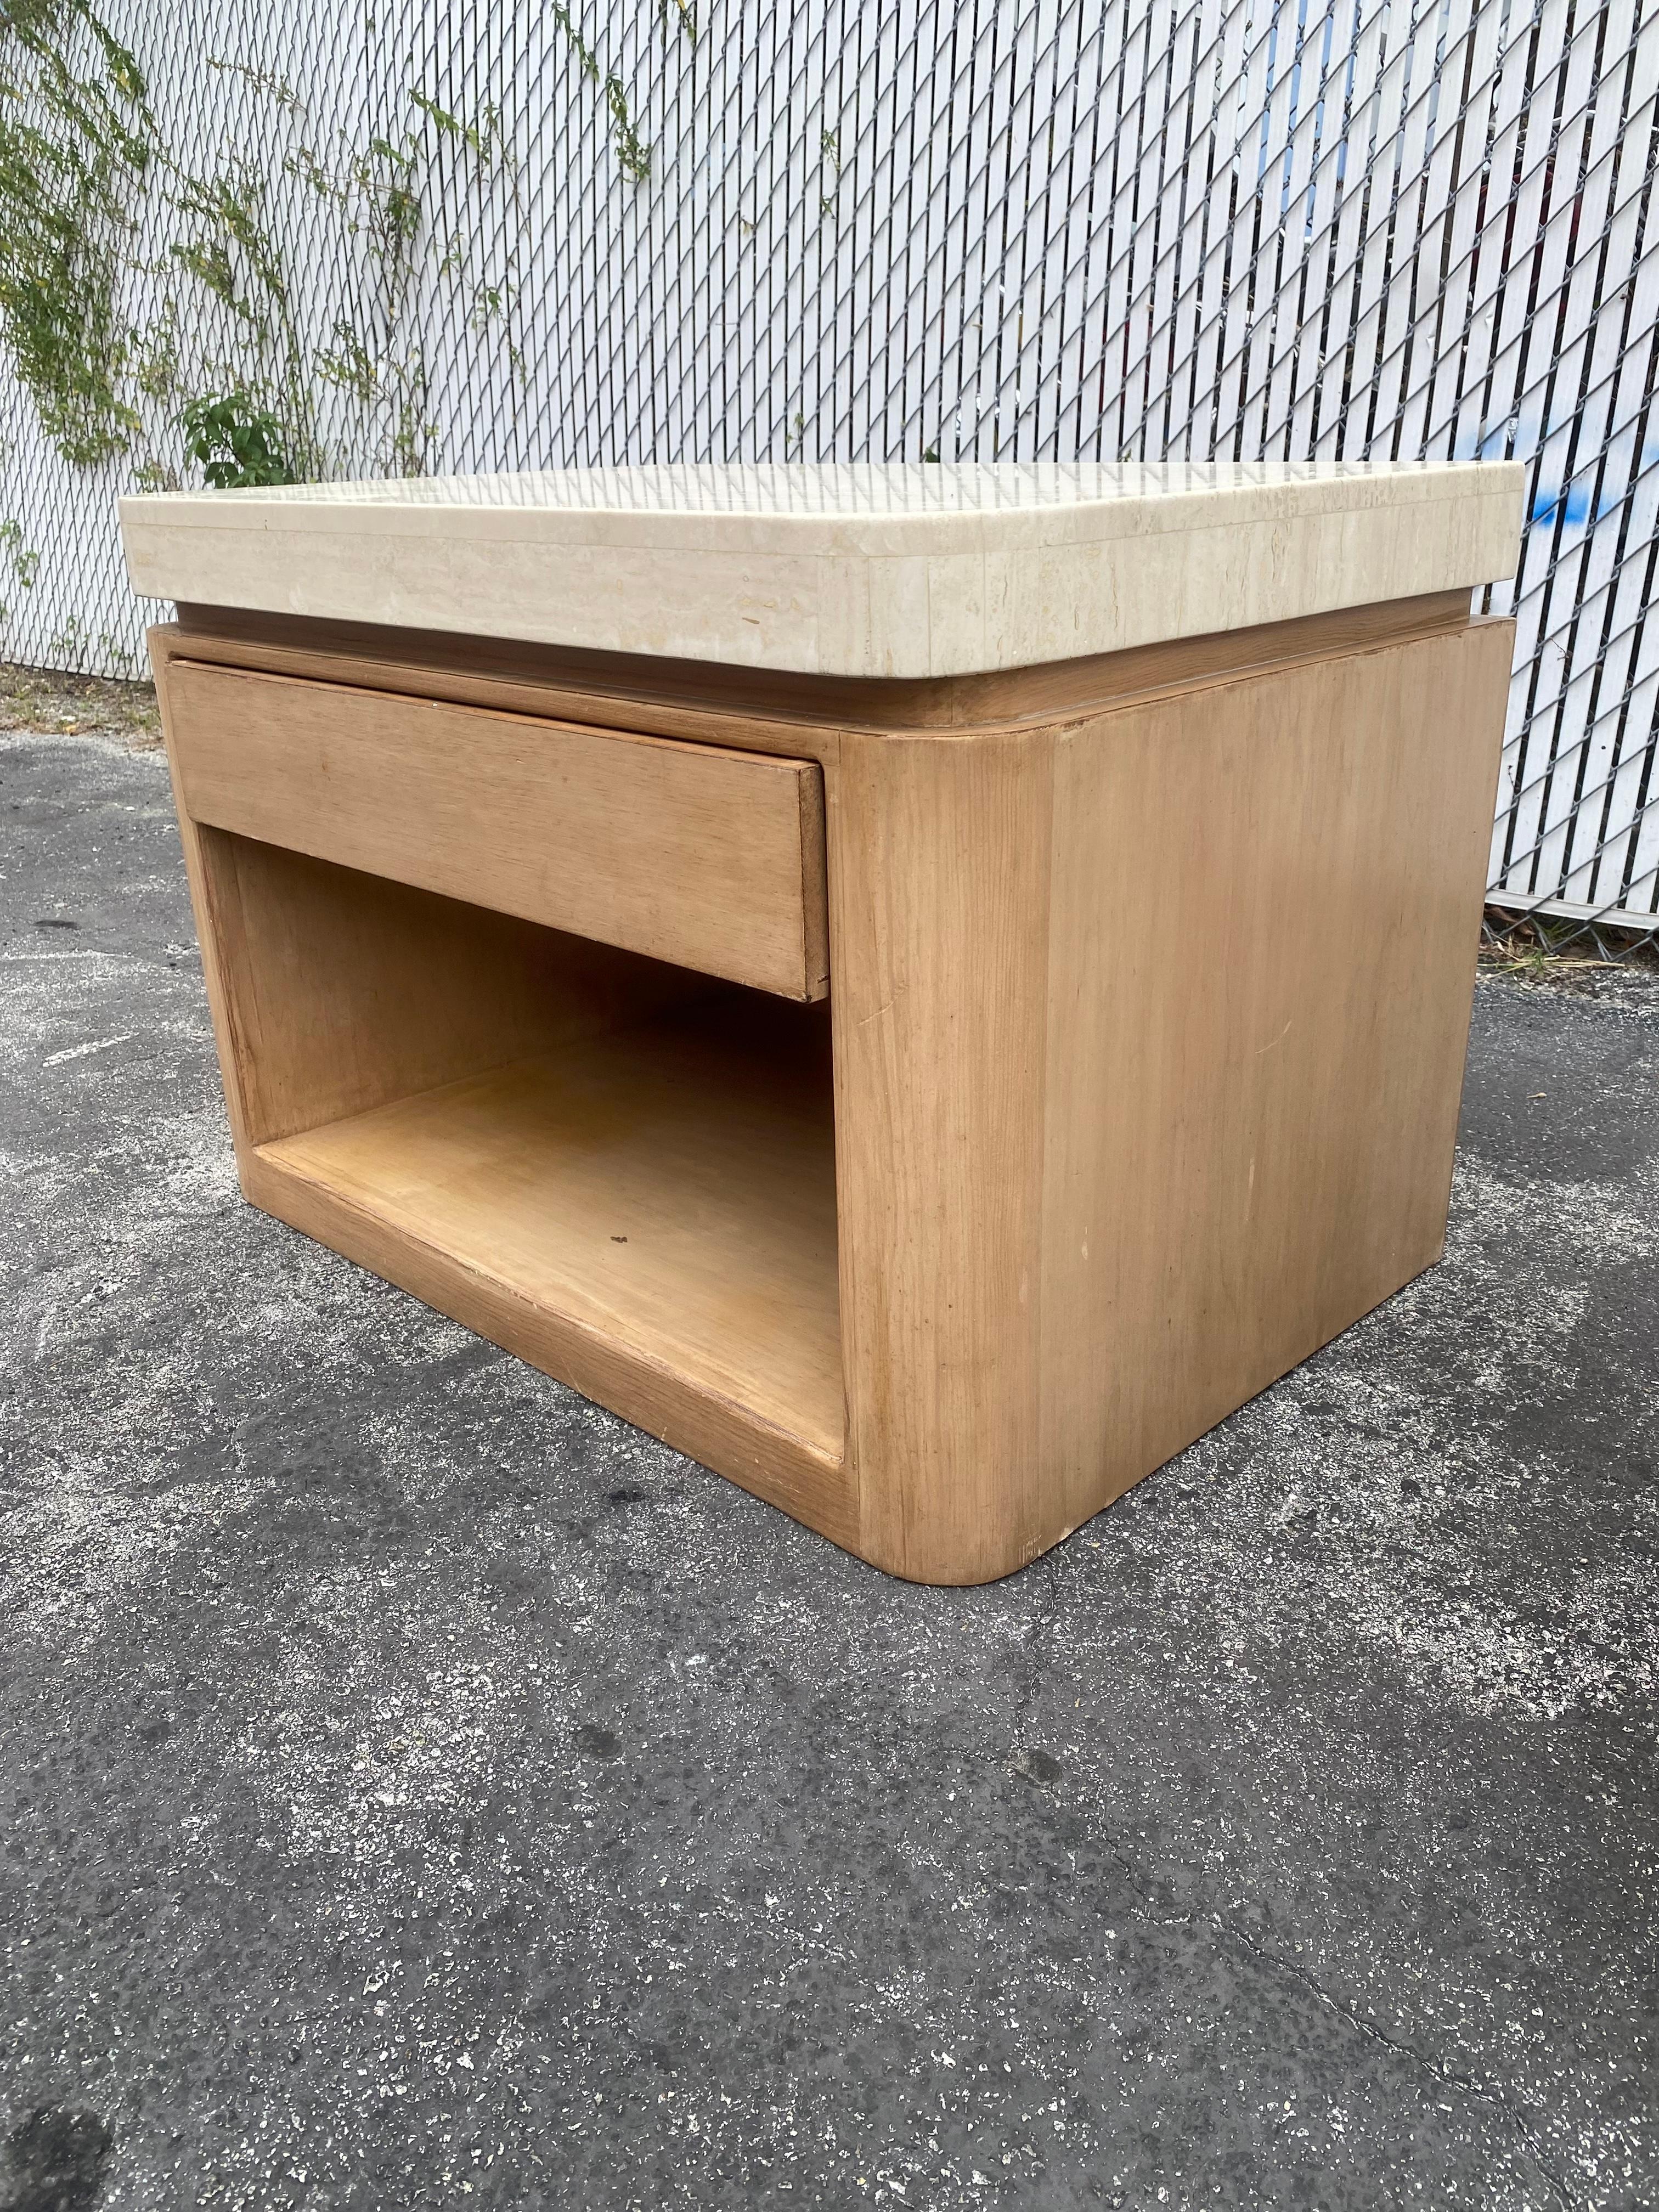 1990s Large Travertine and Wood Night Stands End Table For Sale 2